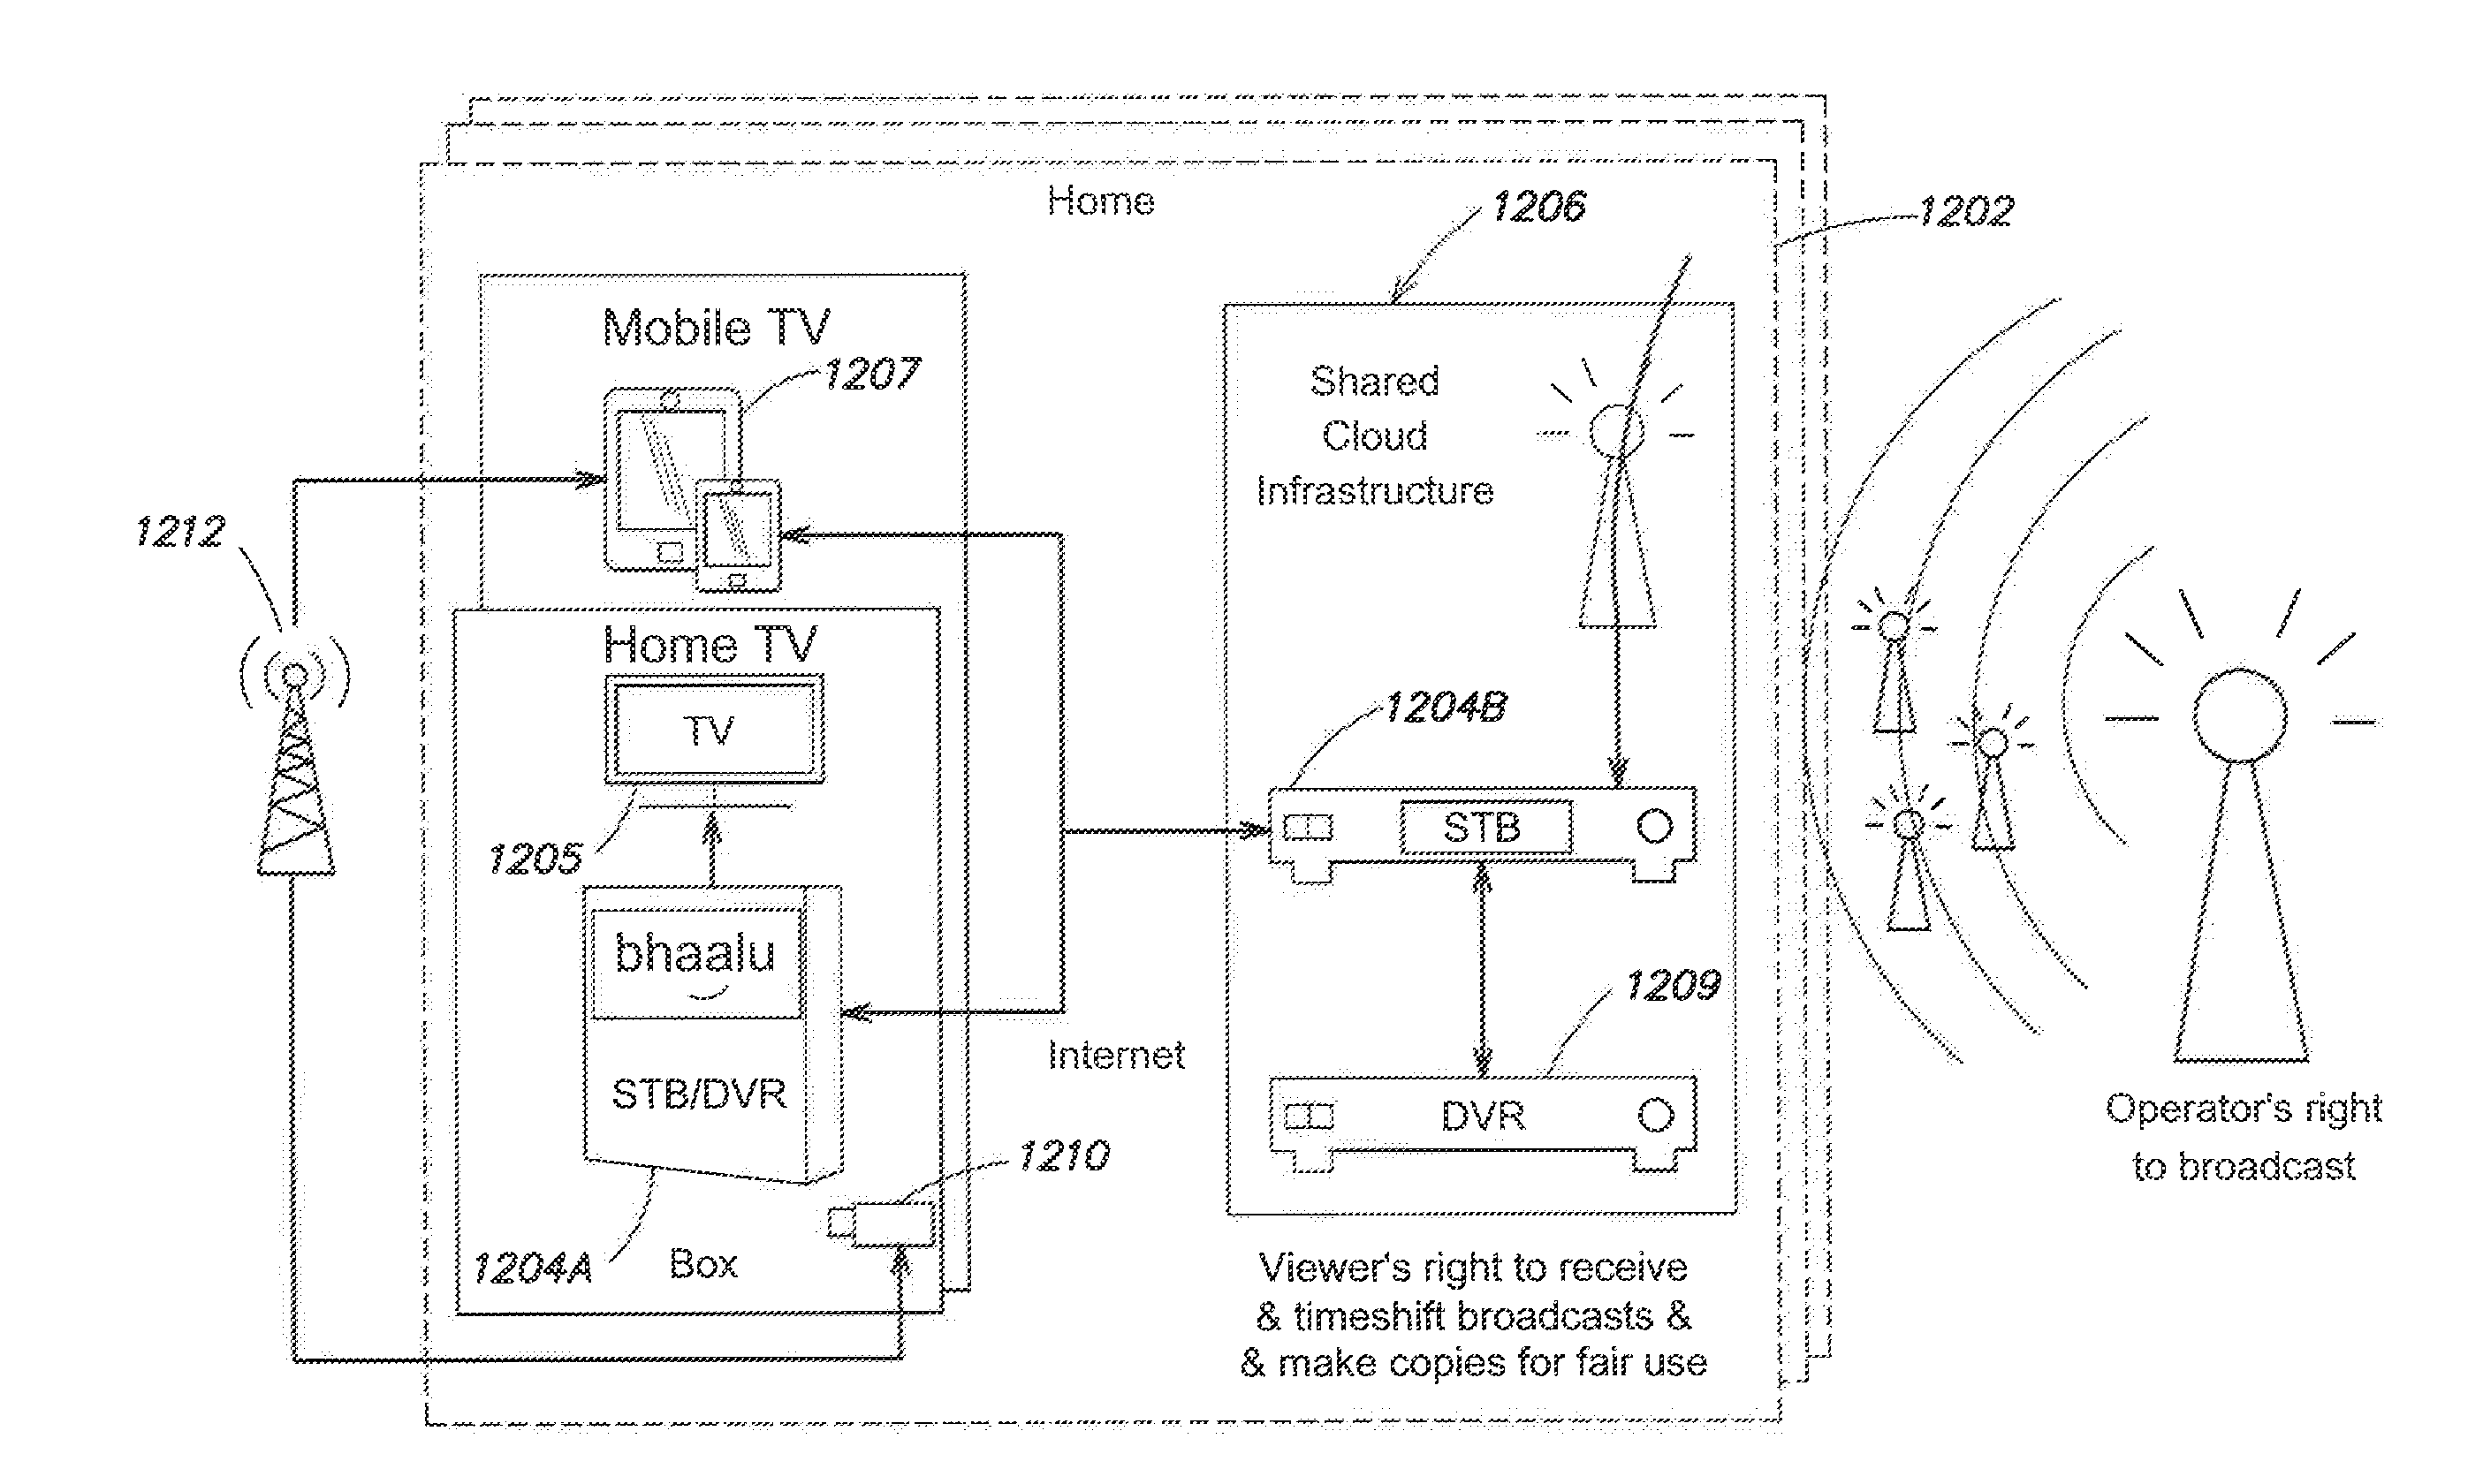 Method and system for collaborative broadcast and timeshifted viewing